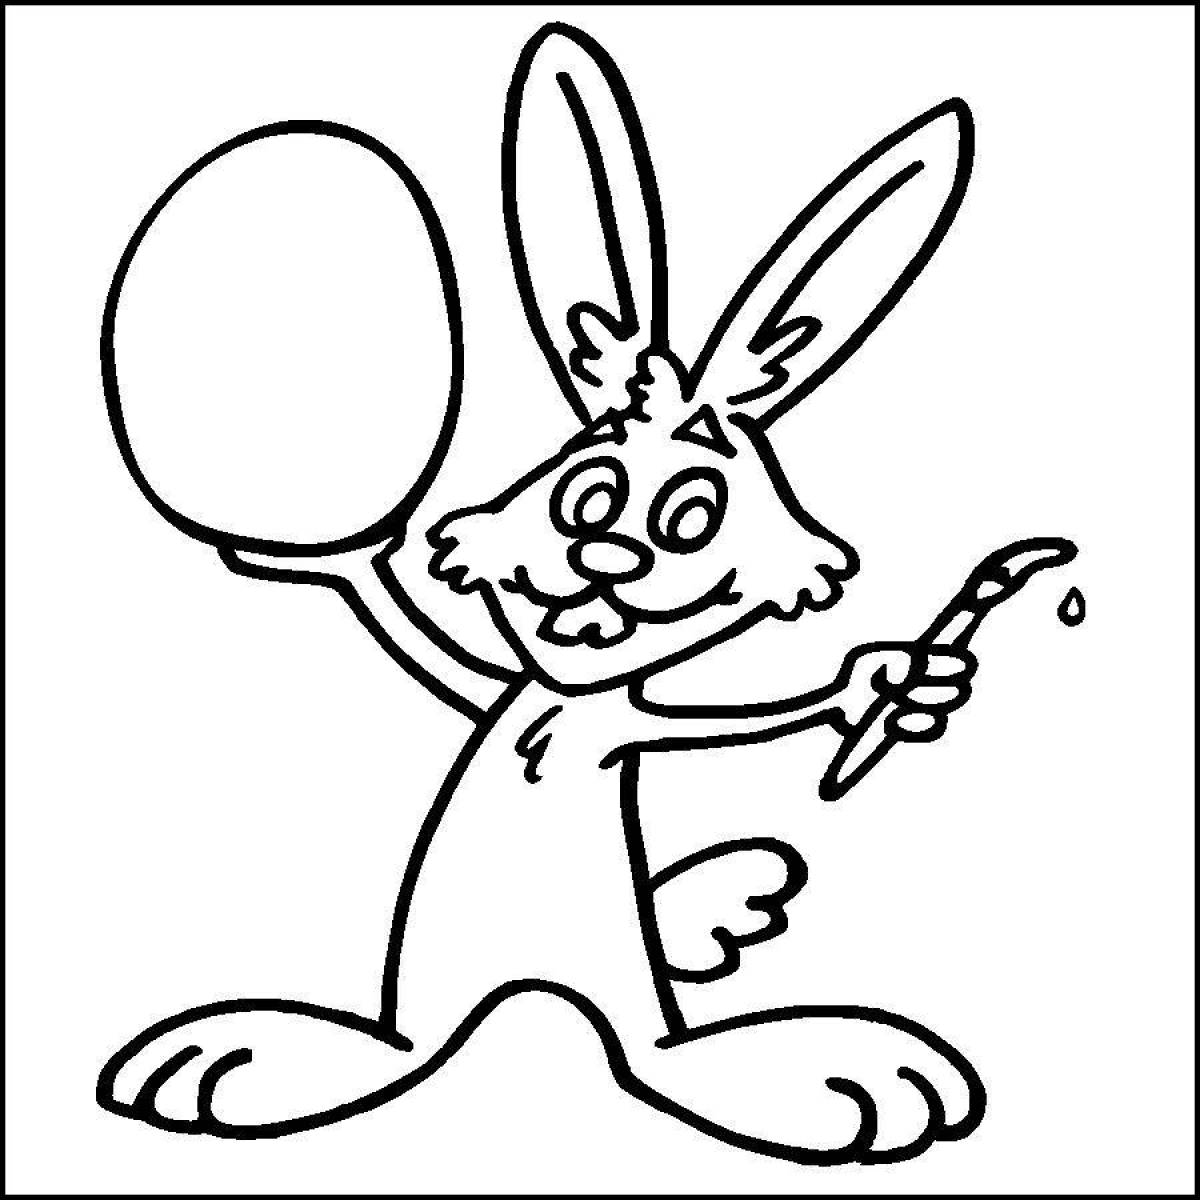 Coloring page adorable roger rabbit